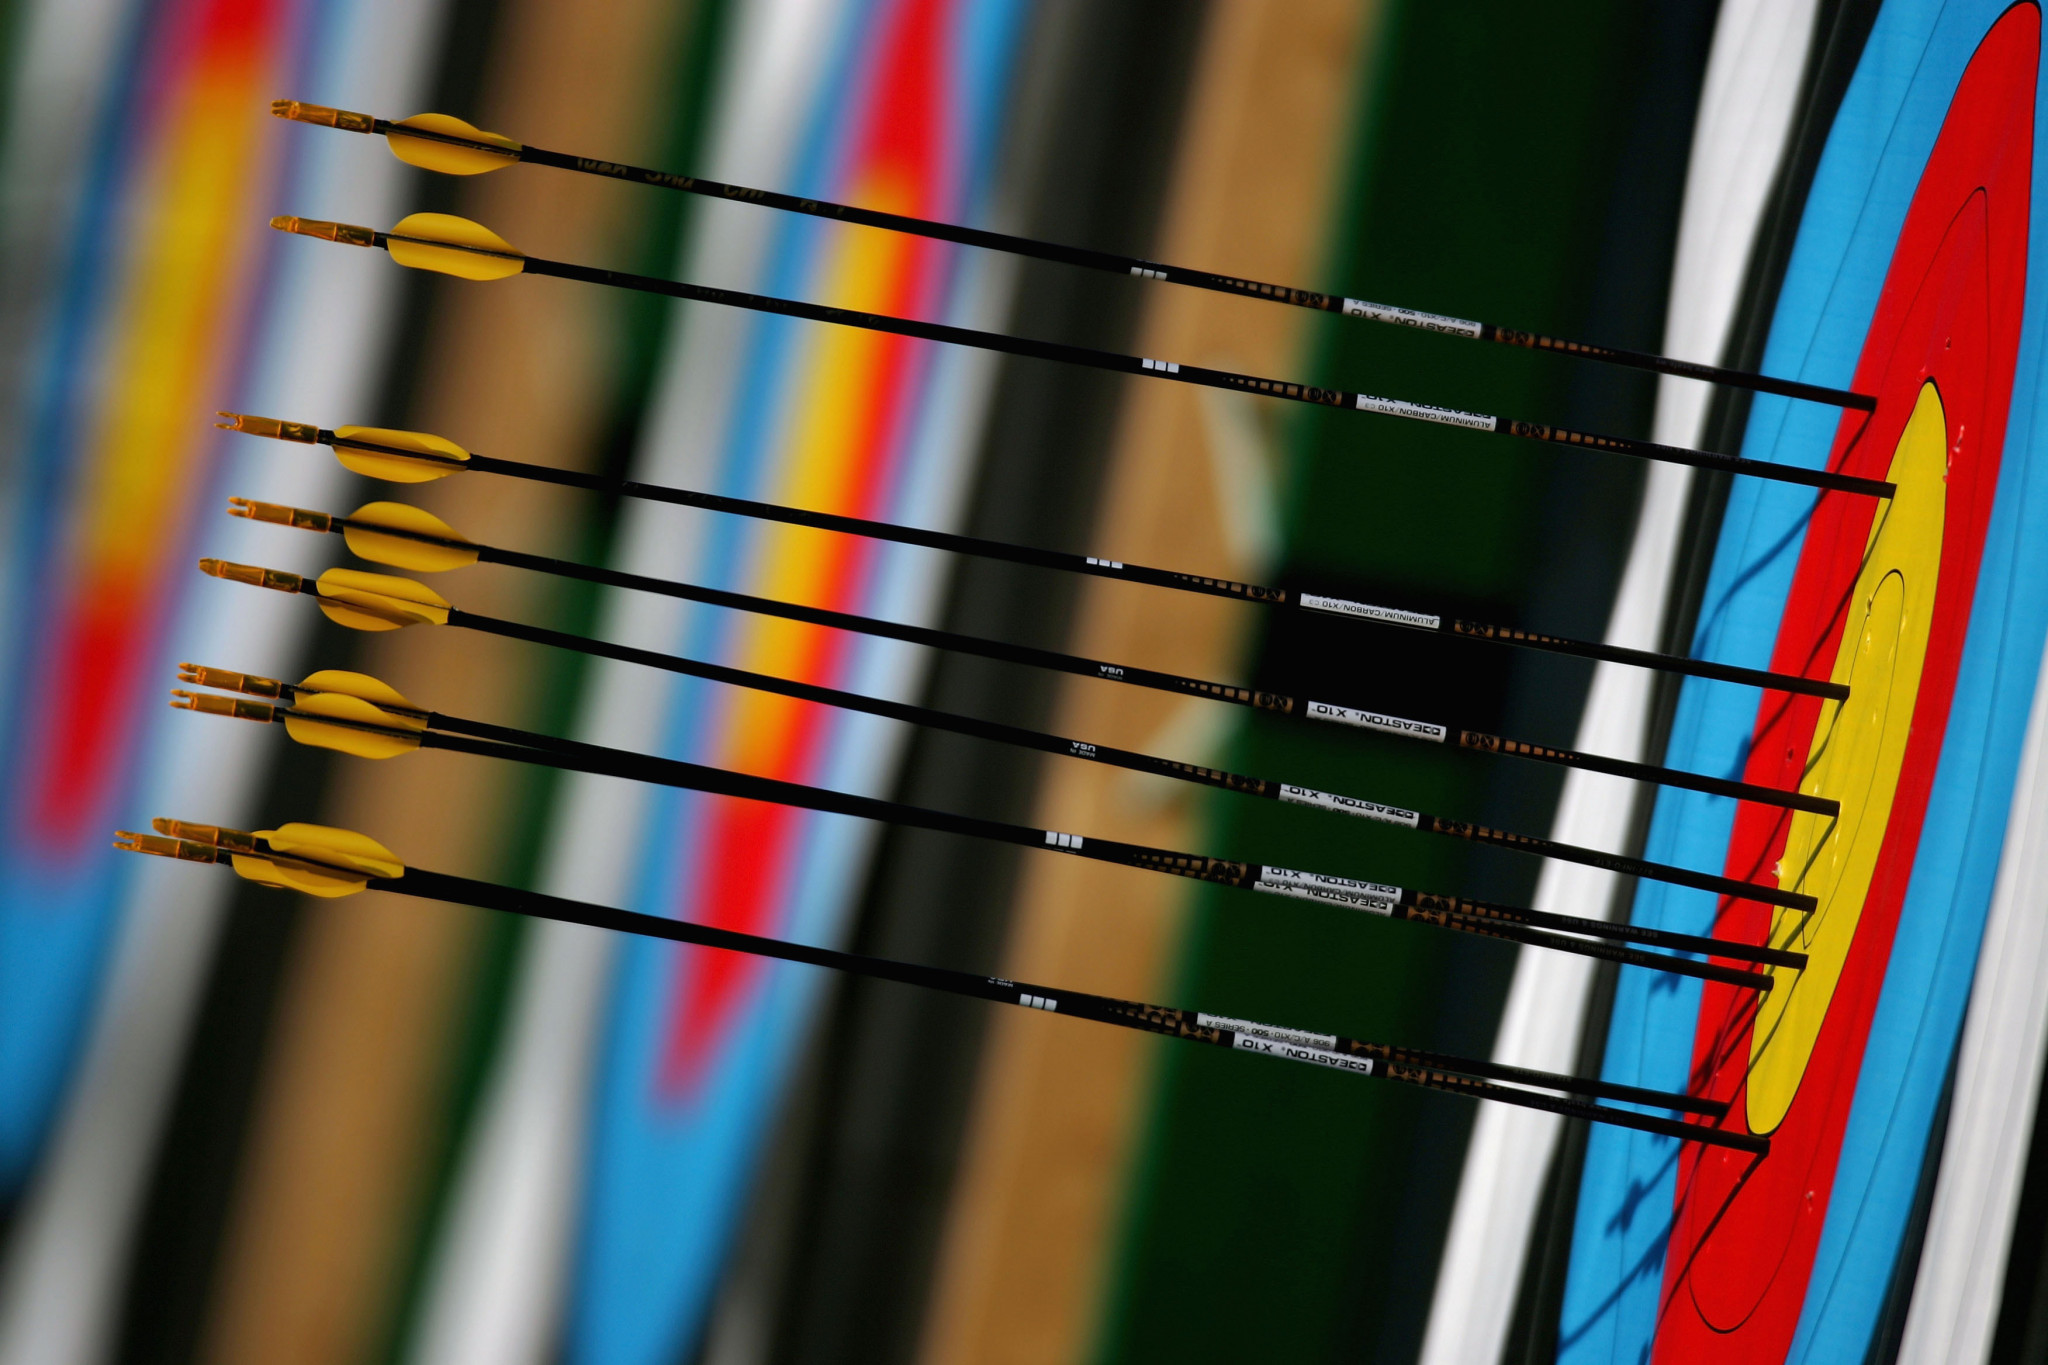 One official said 25 new archery clubs were founded in Nigerian capital Lagos in the last year ©Getty Images